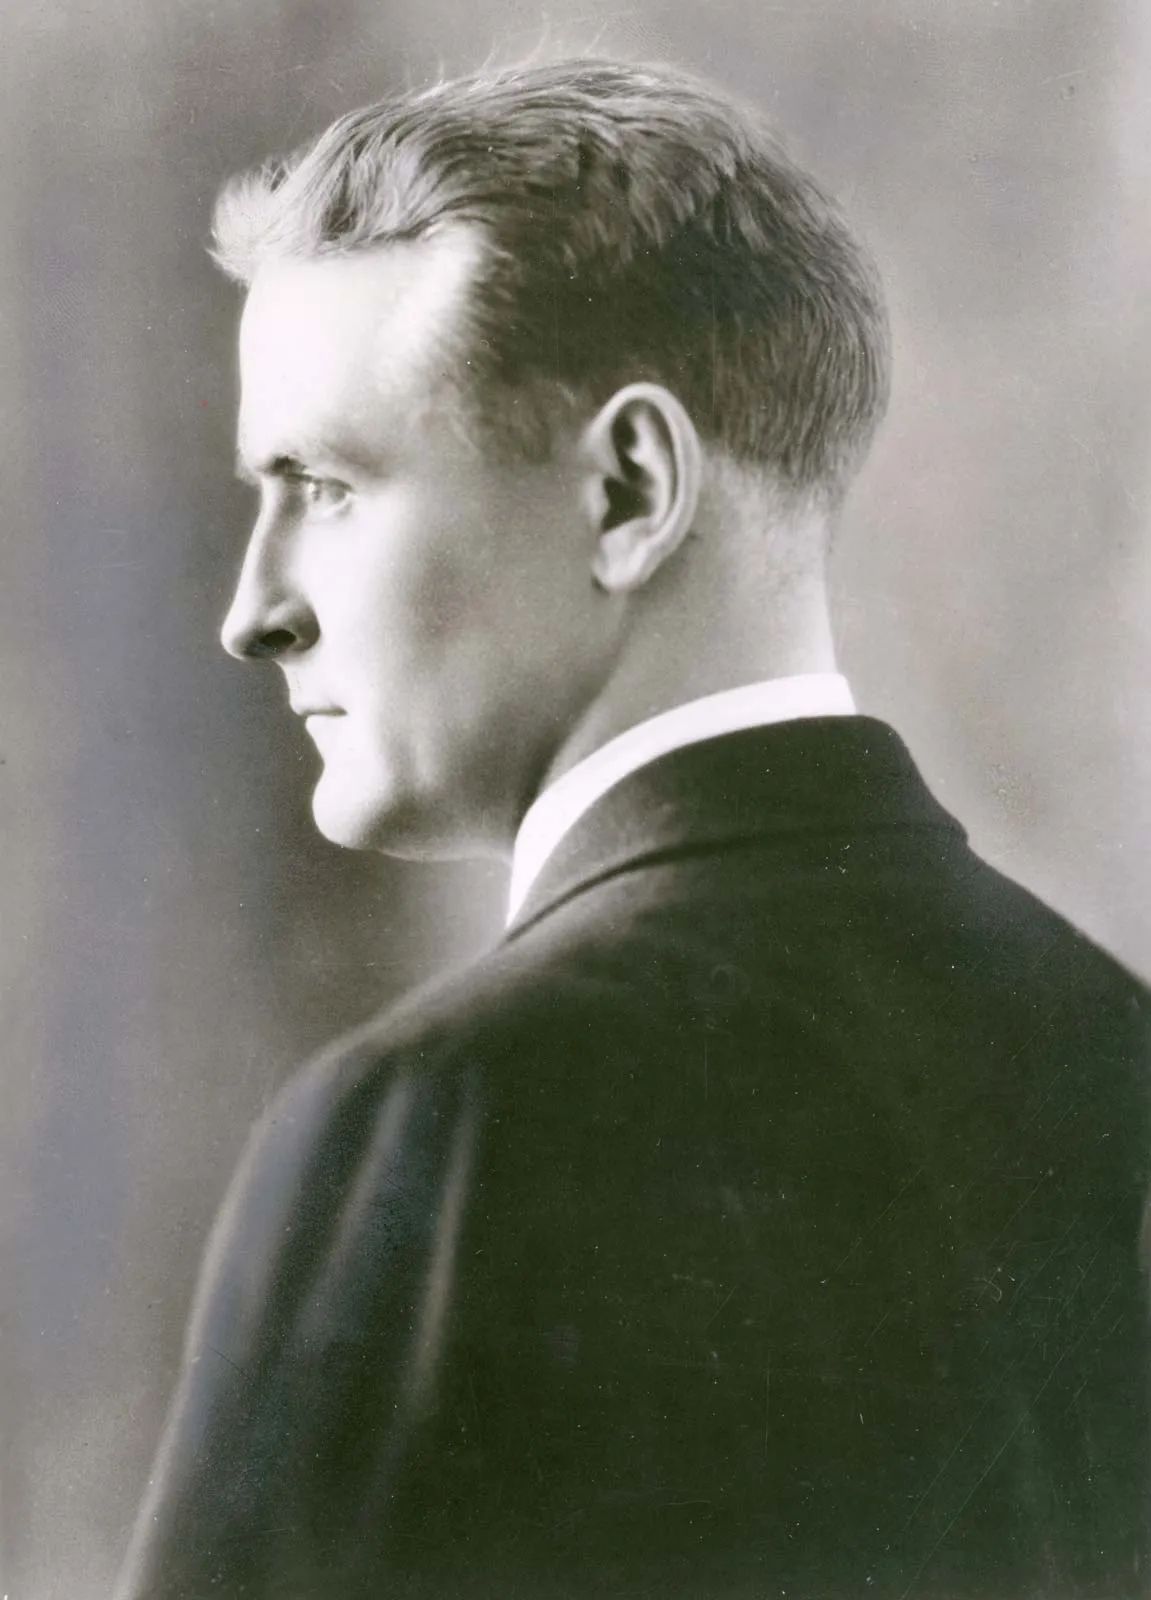 F. Scott Fitzgerald faced controversies over his works